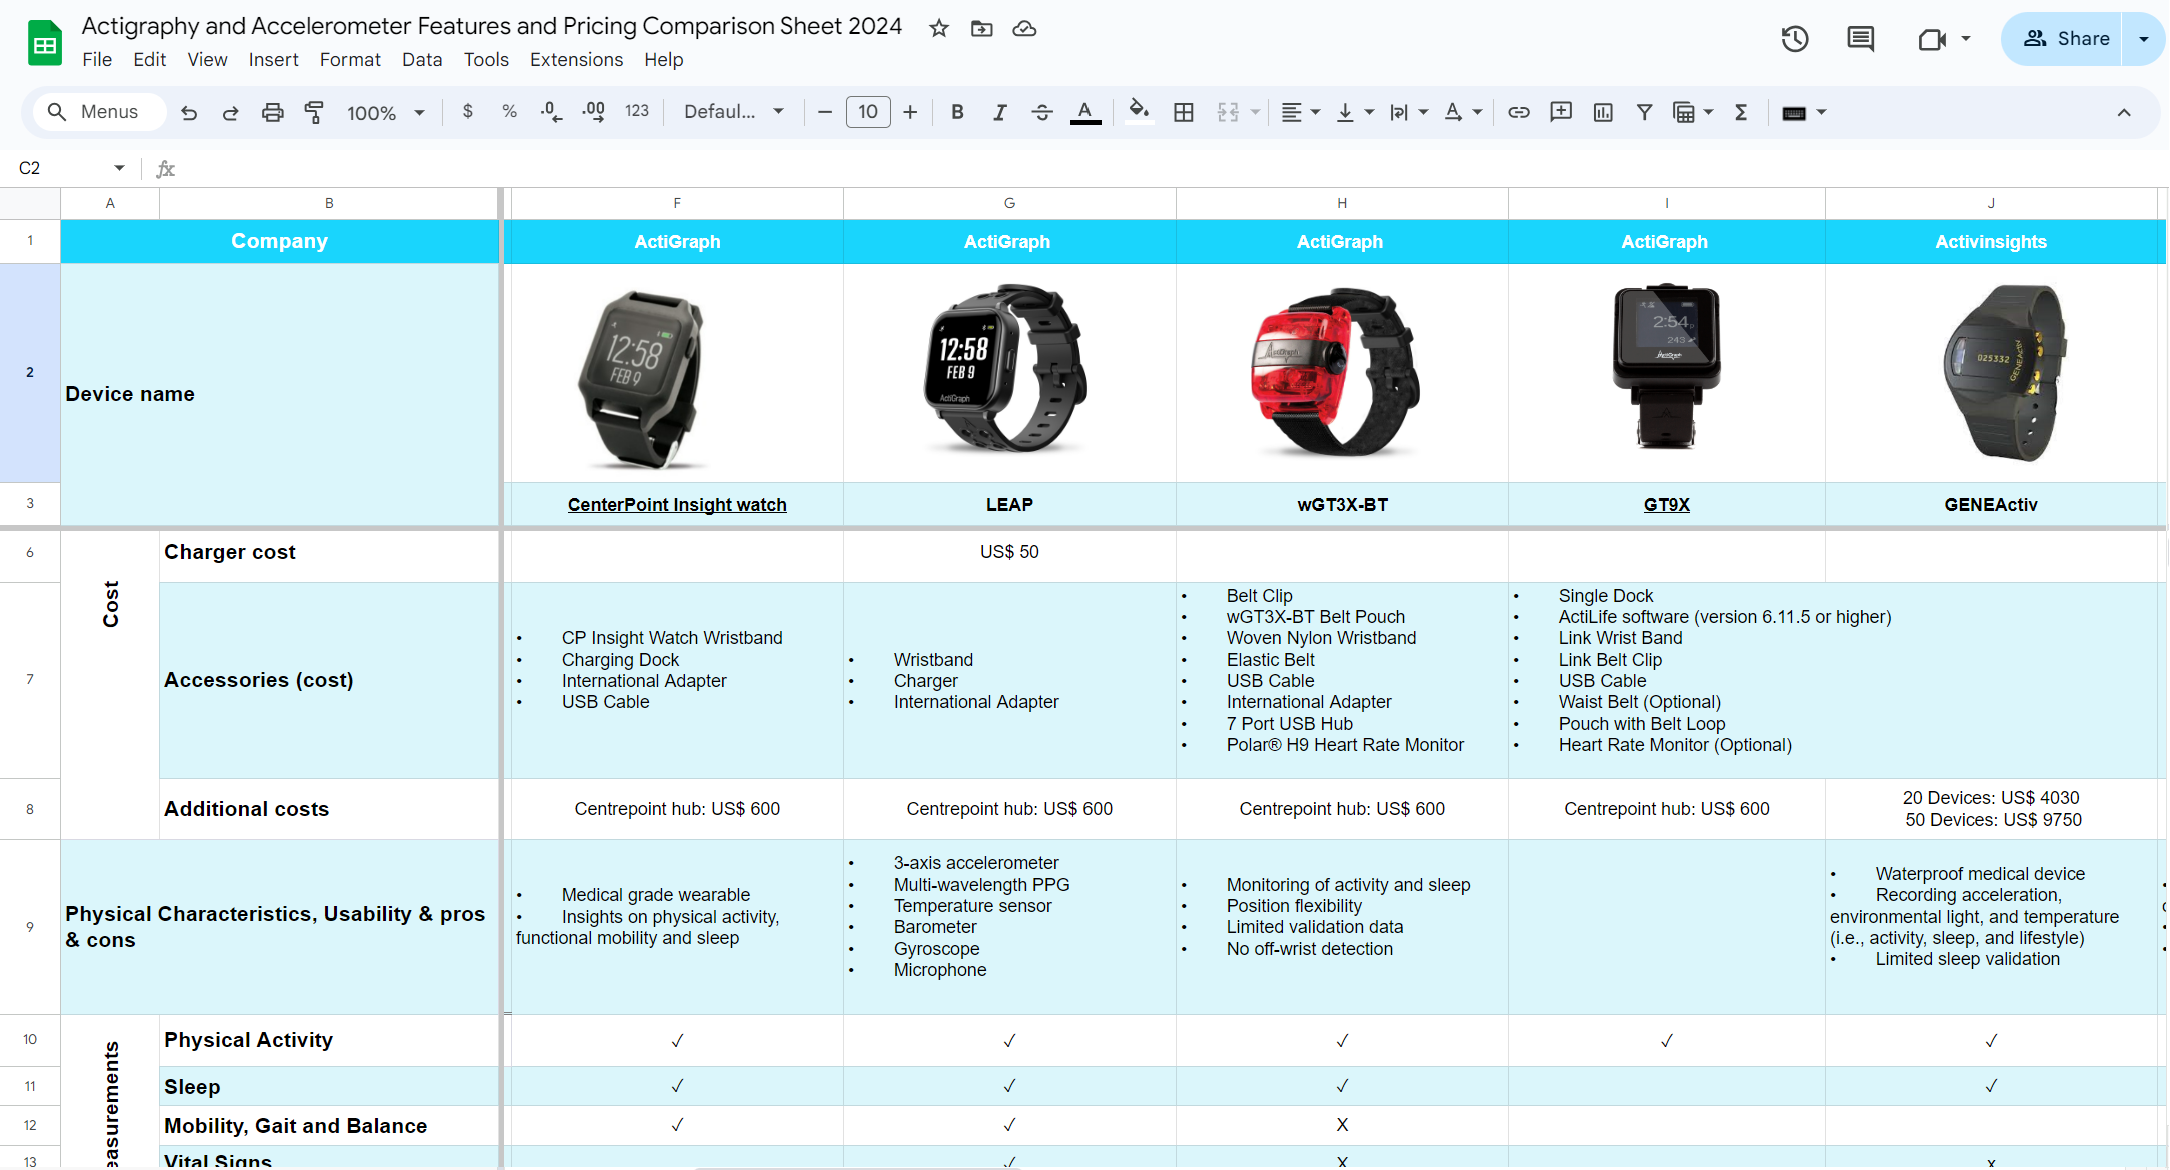 A screenshot of a guide comparing features and pricing of various activity and accelerometer devices for research projects.